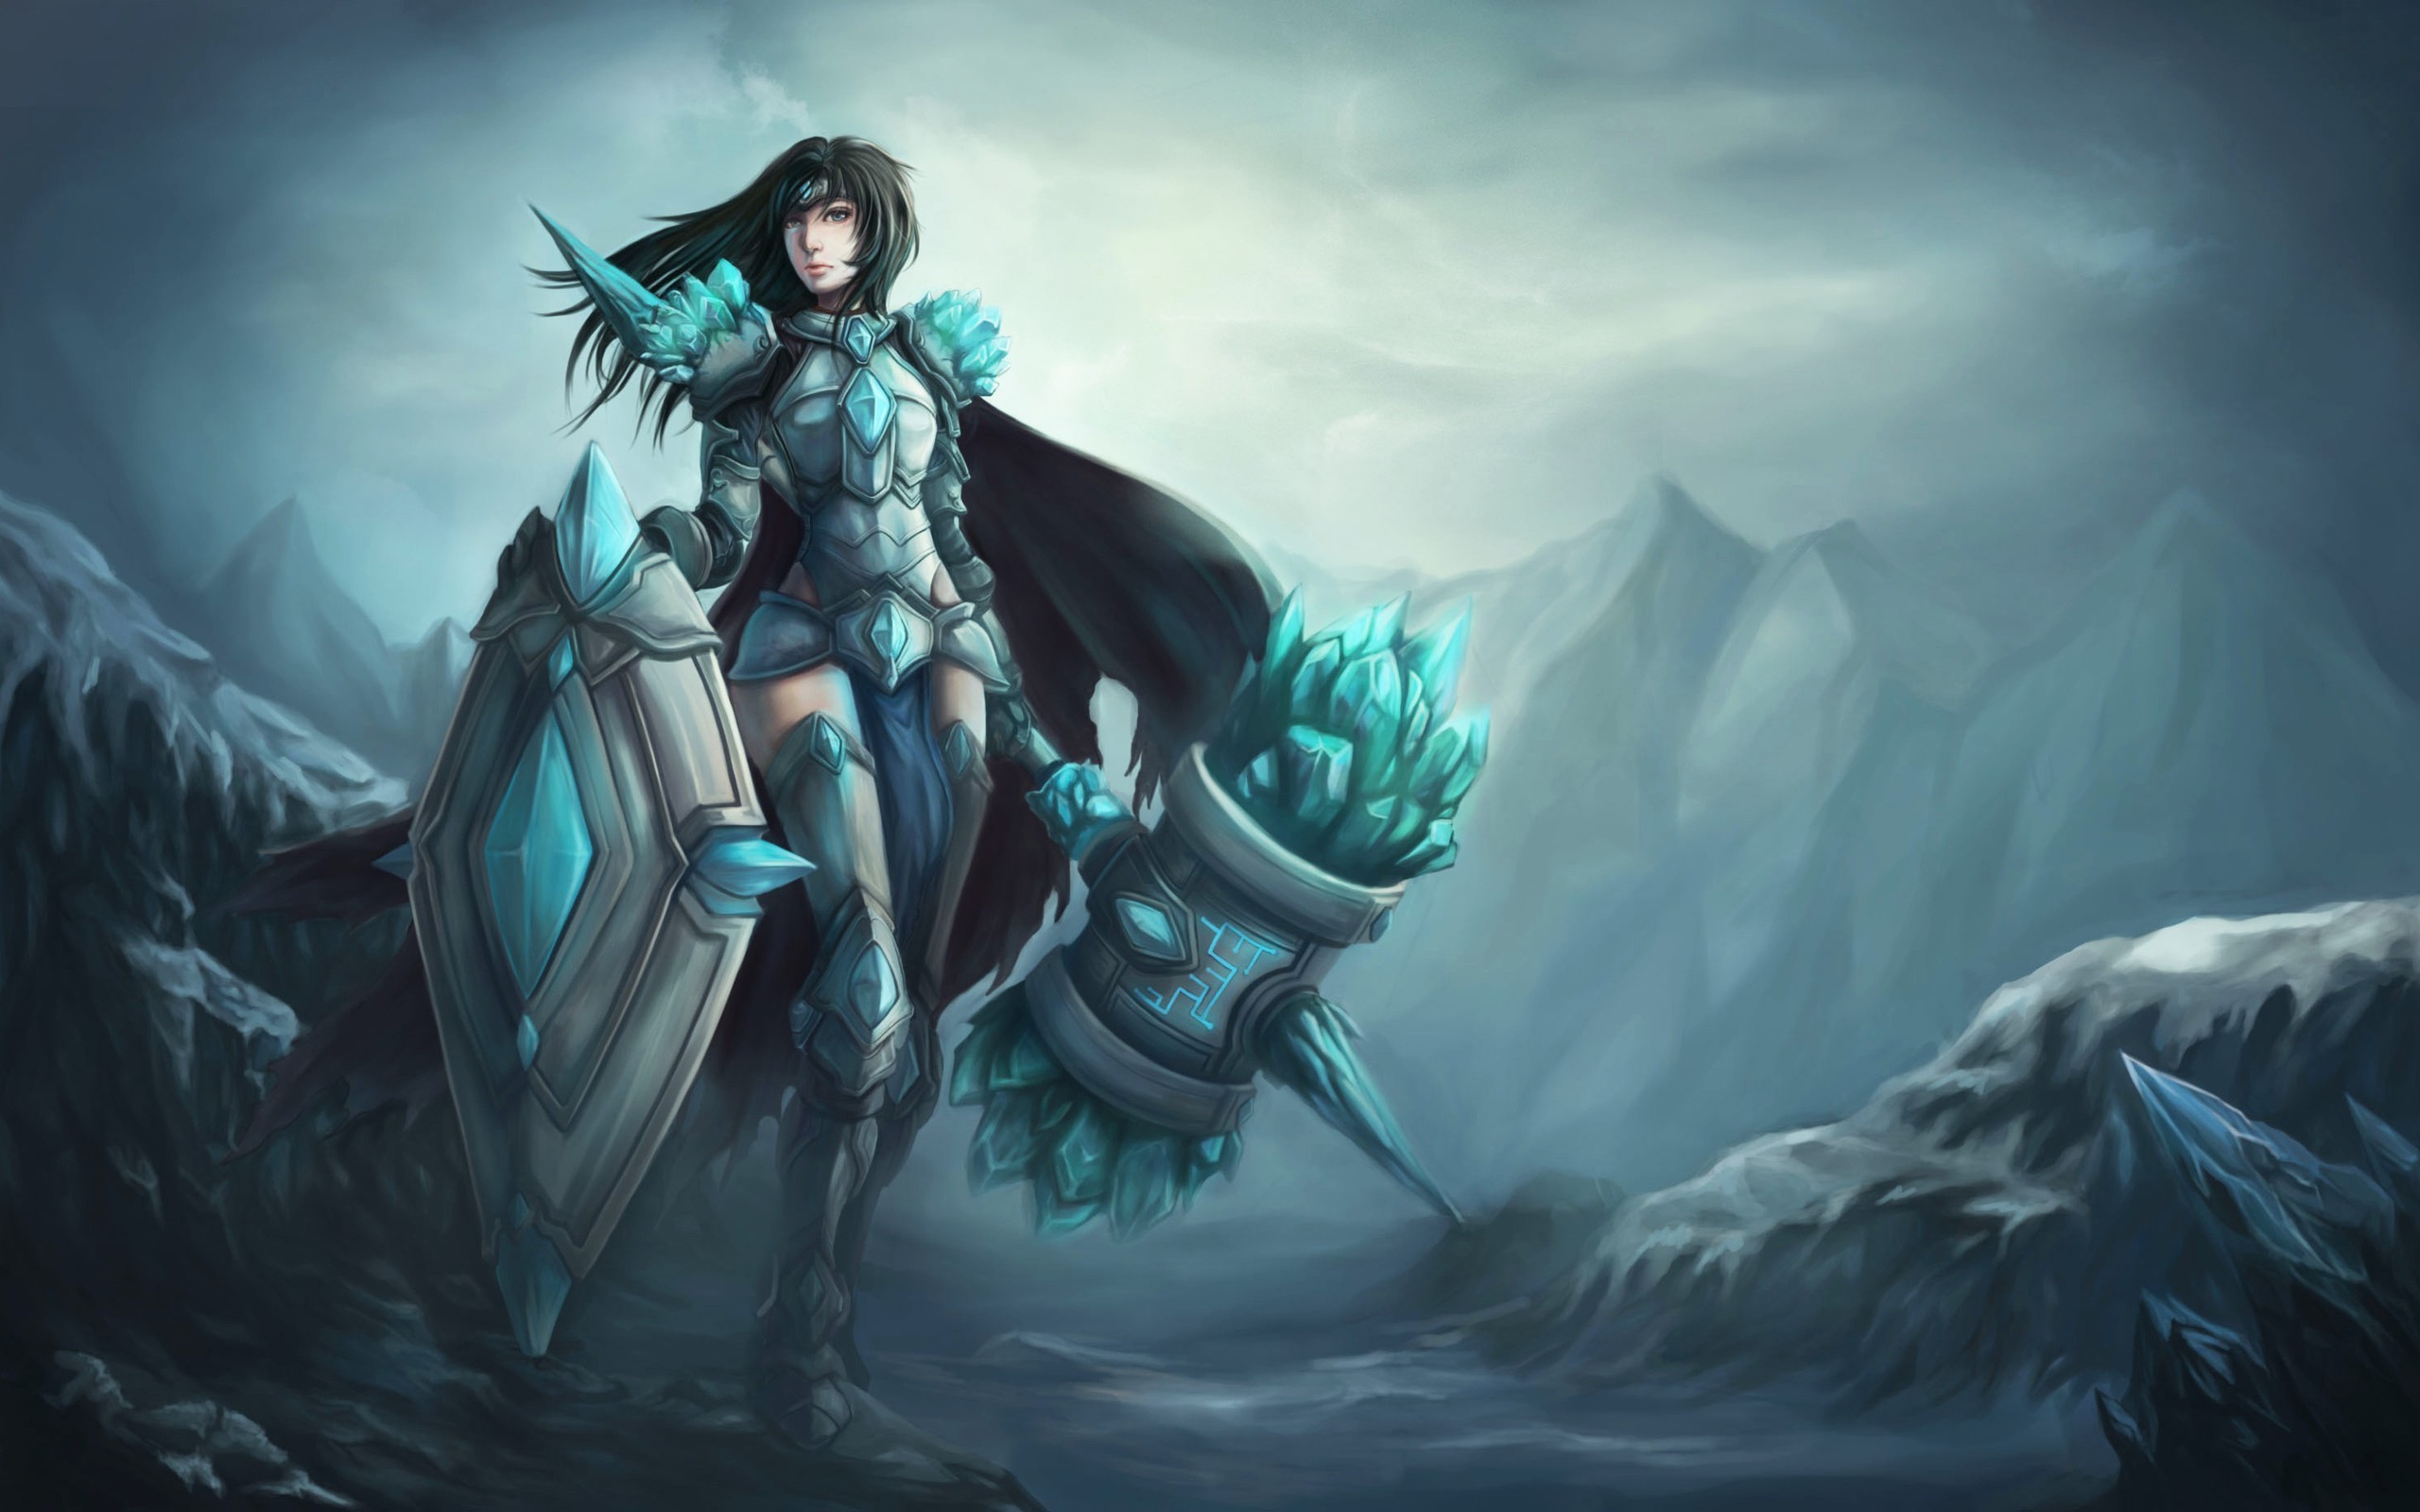 league of legends hd wallpapers 1920x1080,action adventure game,cg artwork,mythology,illustration,fictional character